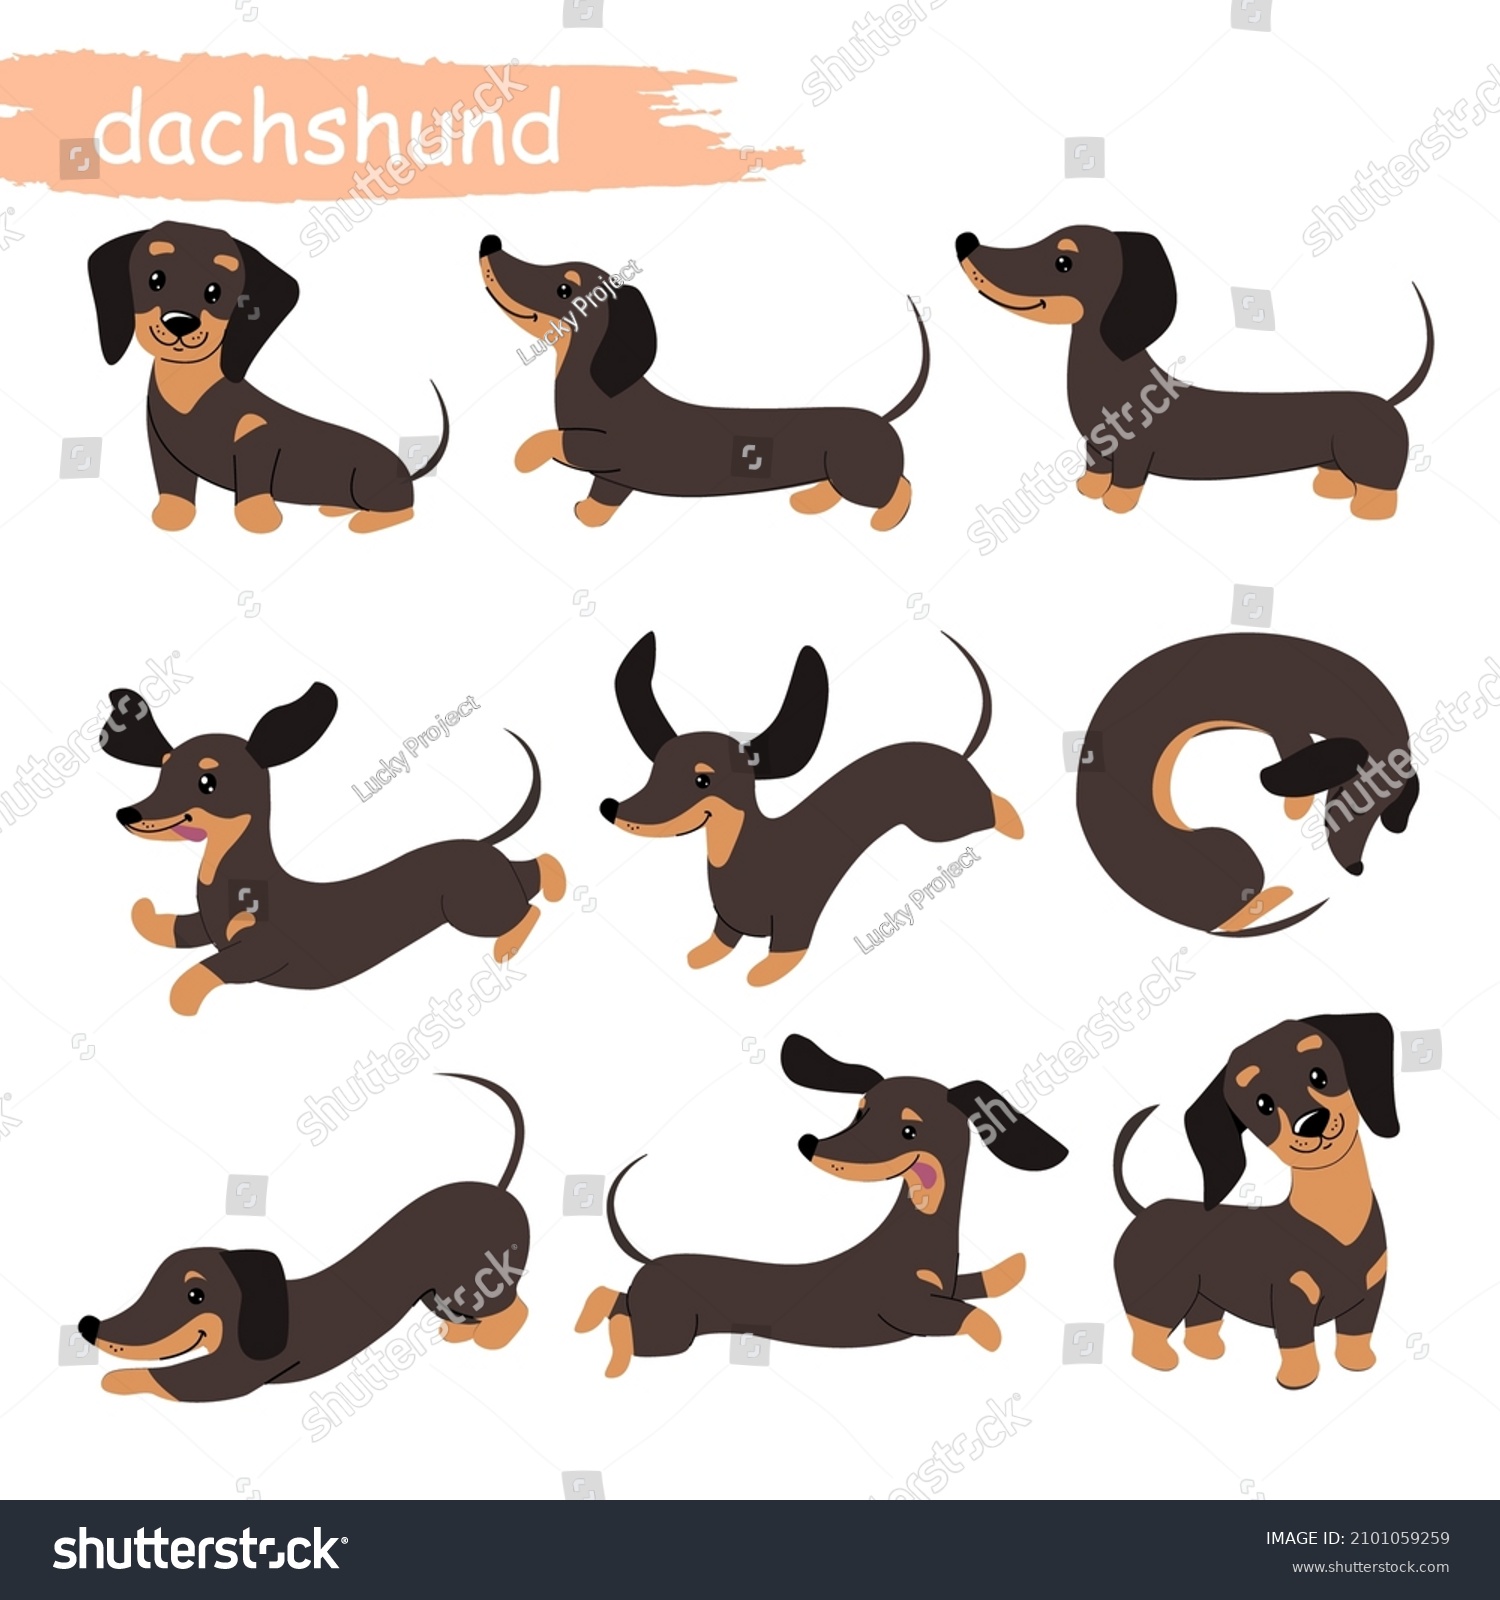 SVG of Set of dachshund dogs in different poses. Vector cartoon illustration. Domestic pet. Design for print svg